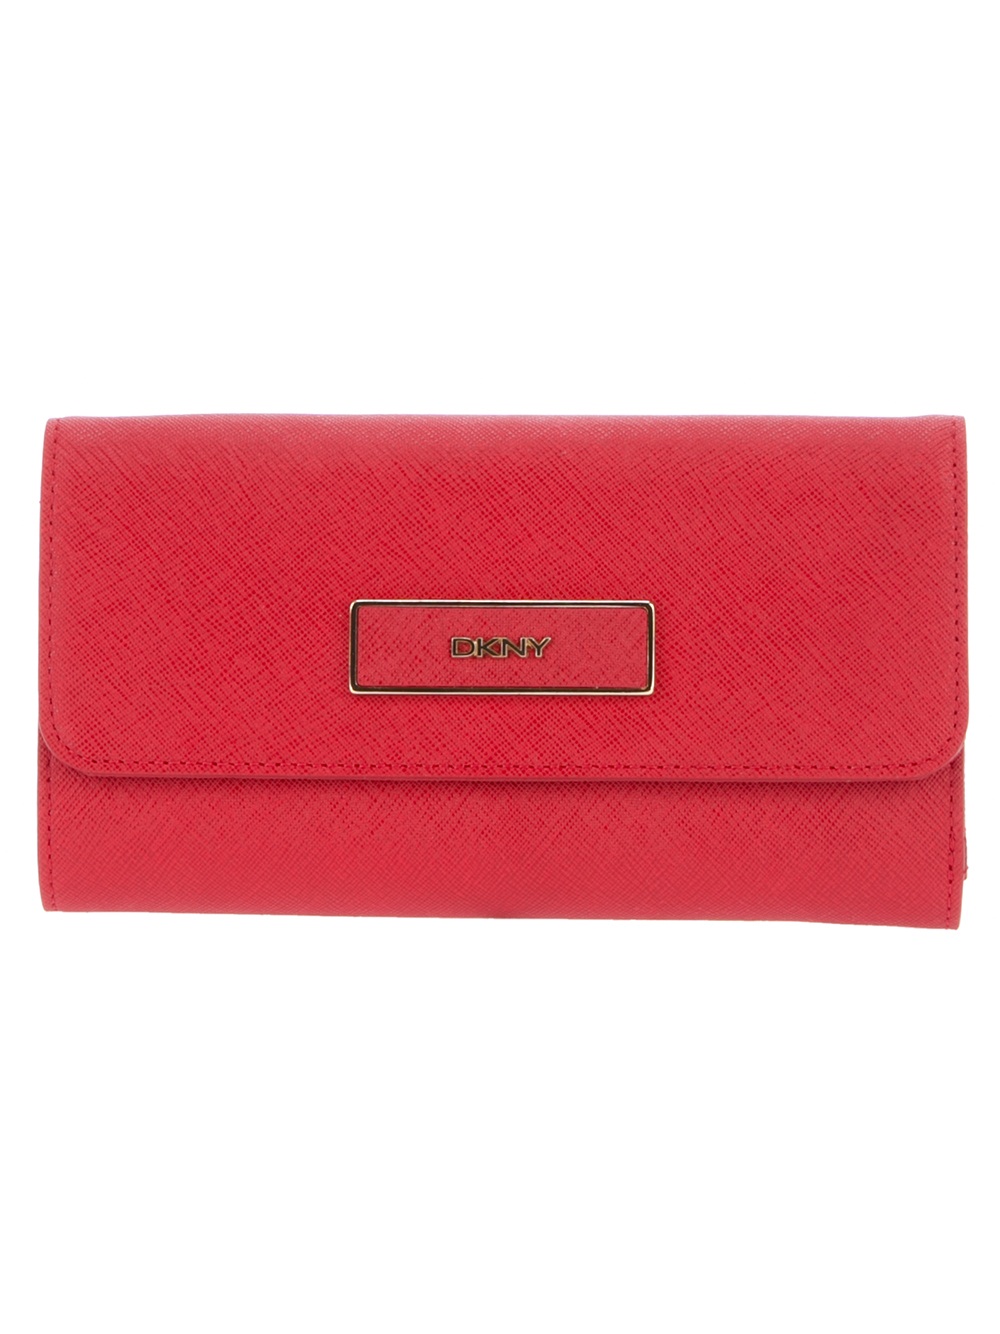 Dkny Leather Wallet in Red | Lyst